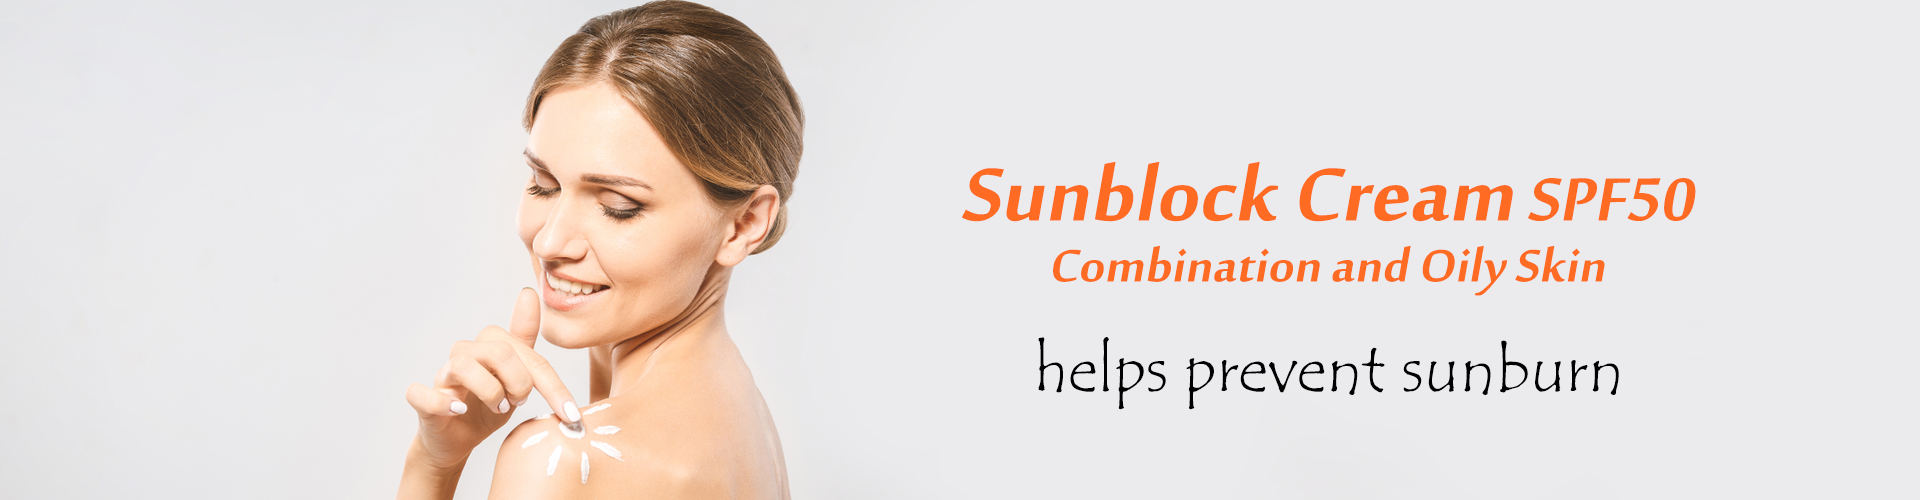 Sunblock Cream SPF50 For Combination and Oily - ALBADERM Middle East - Skincare Products Skin - 